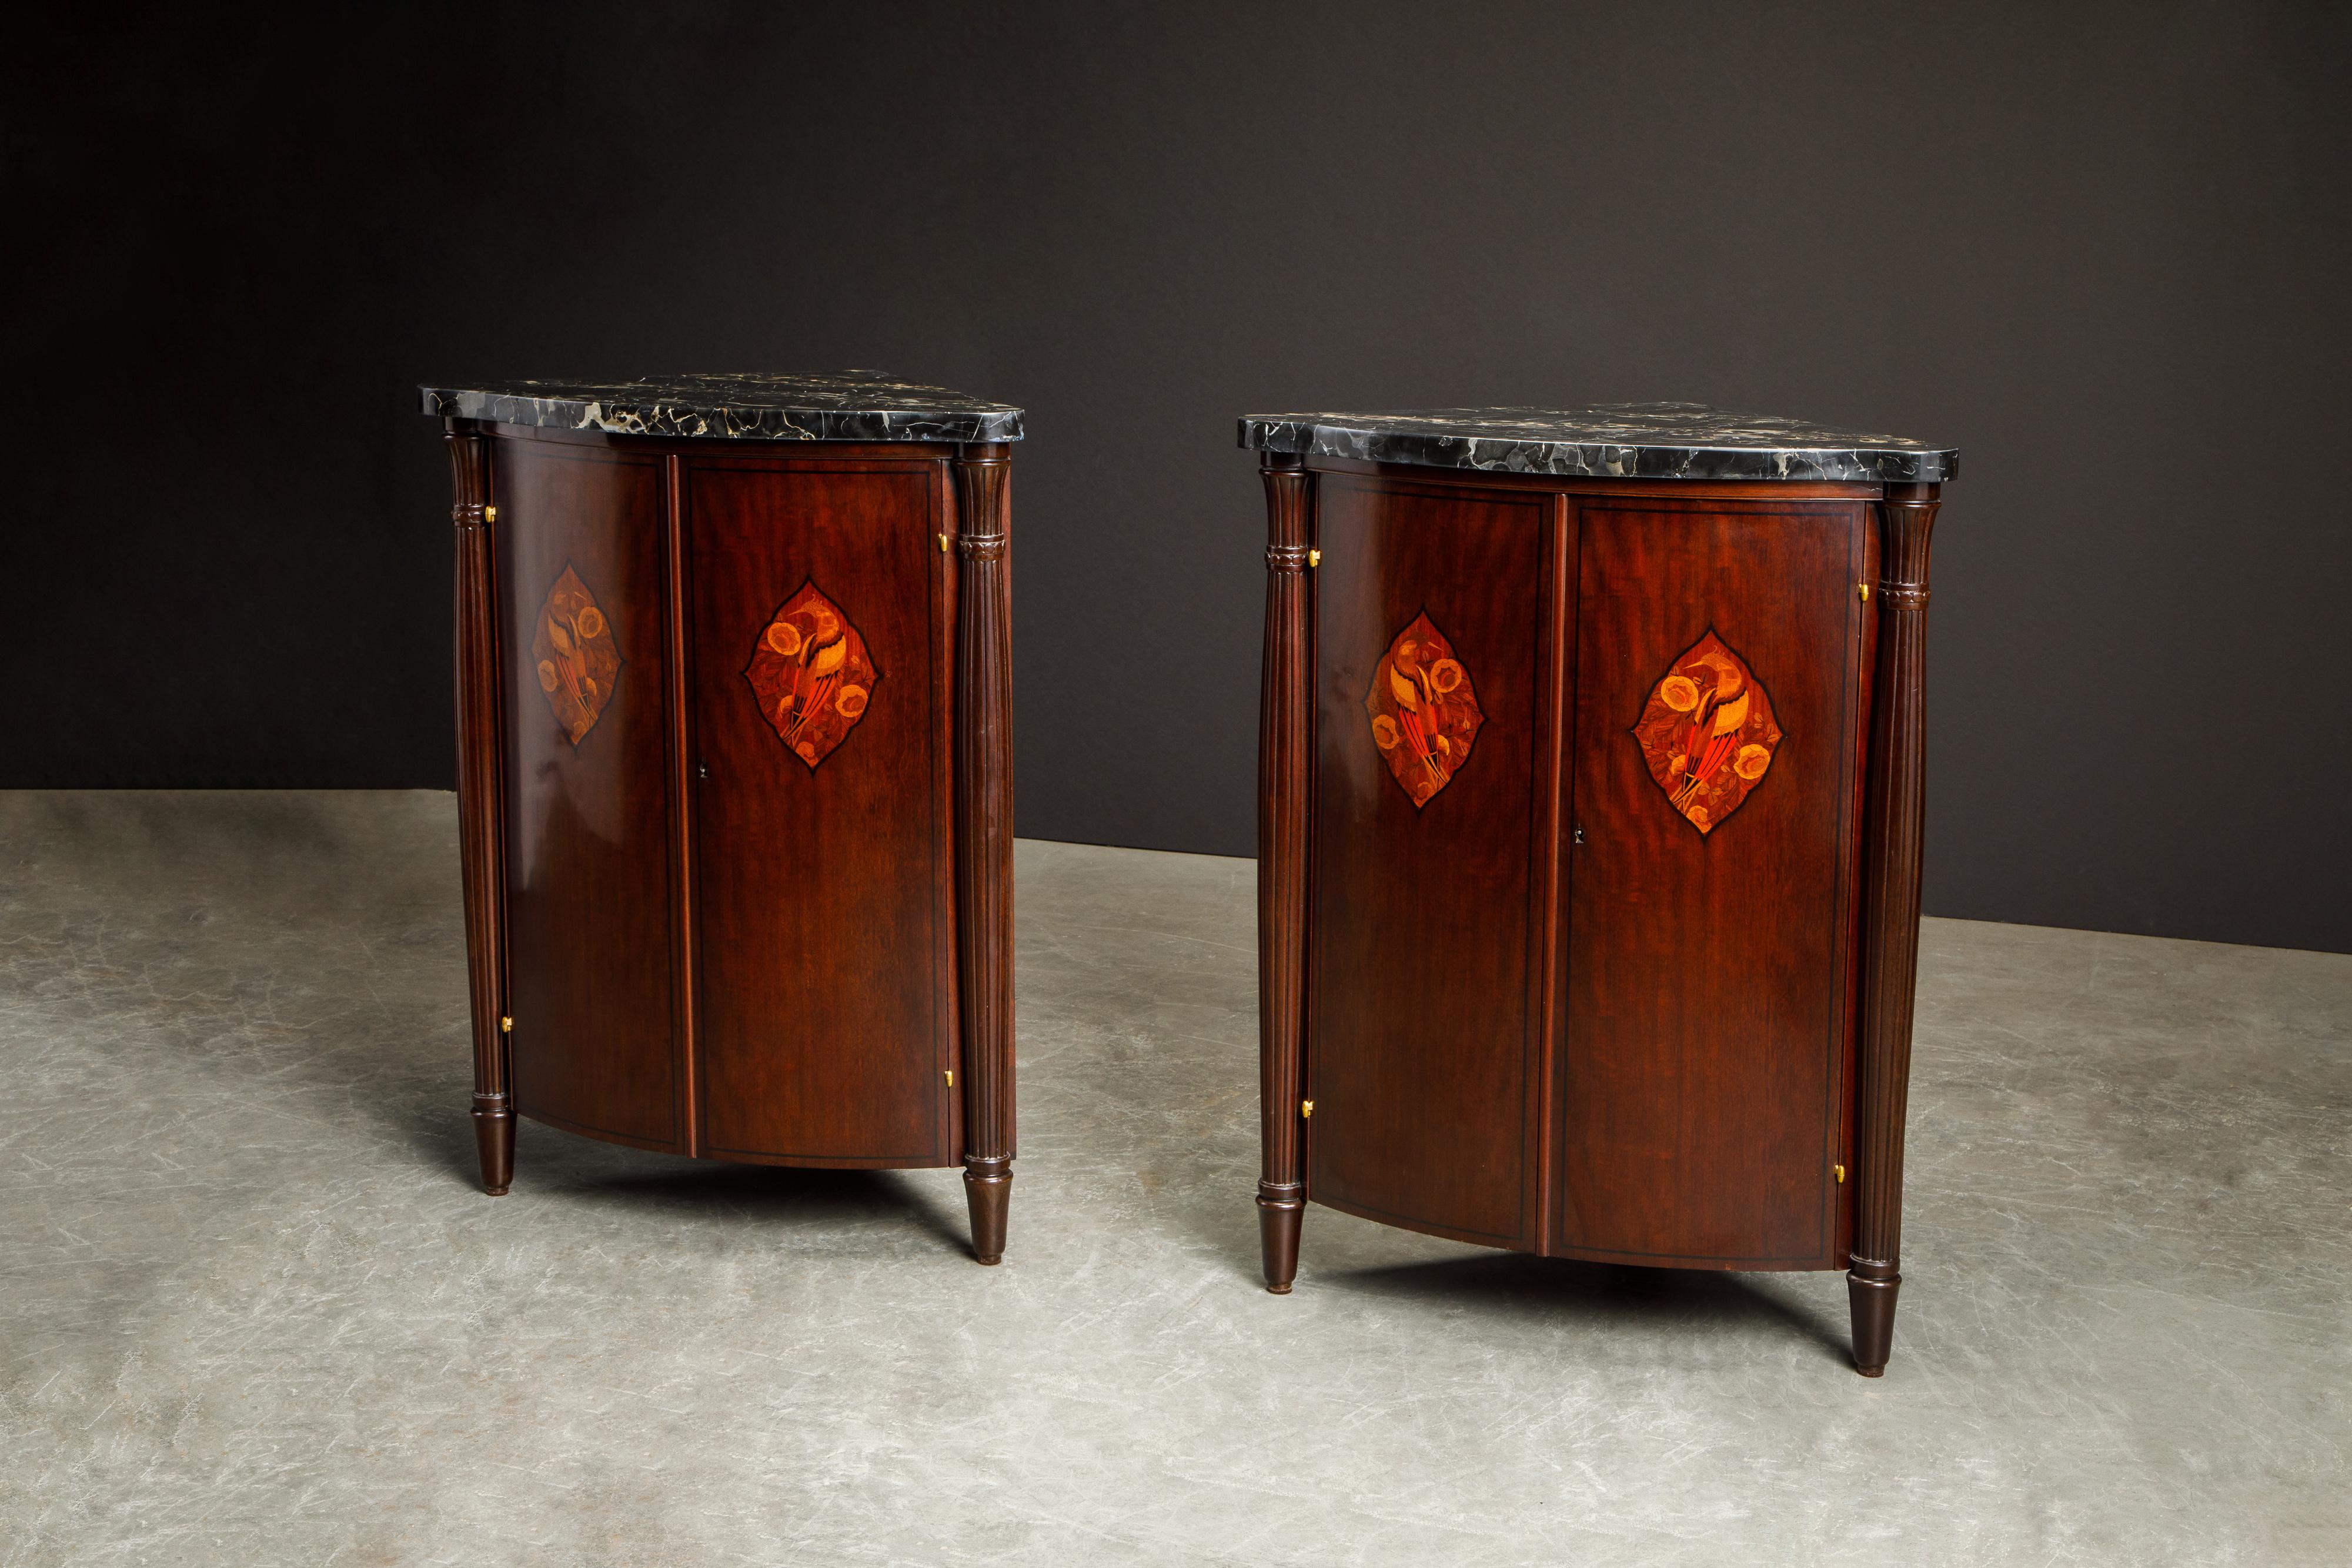 Leon Jallot Pair of Inlaid Amaranth and Nero Portoro Encoignures, c 1925, Signed In Excellent Condition For Sale In Los Angeles, CA